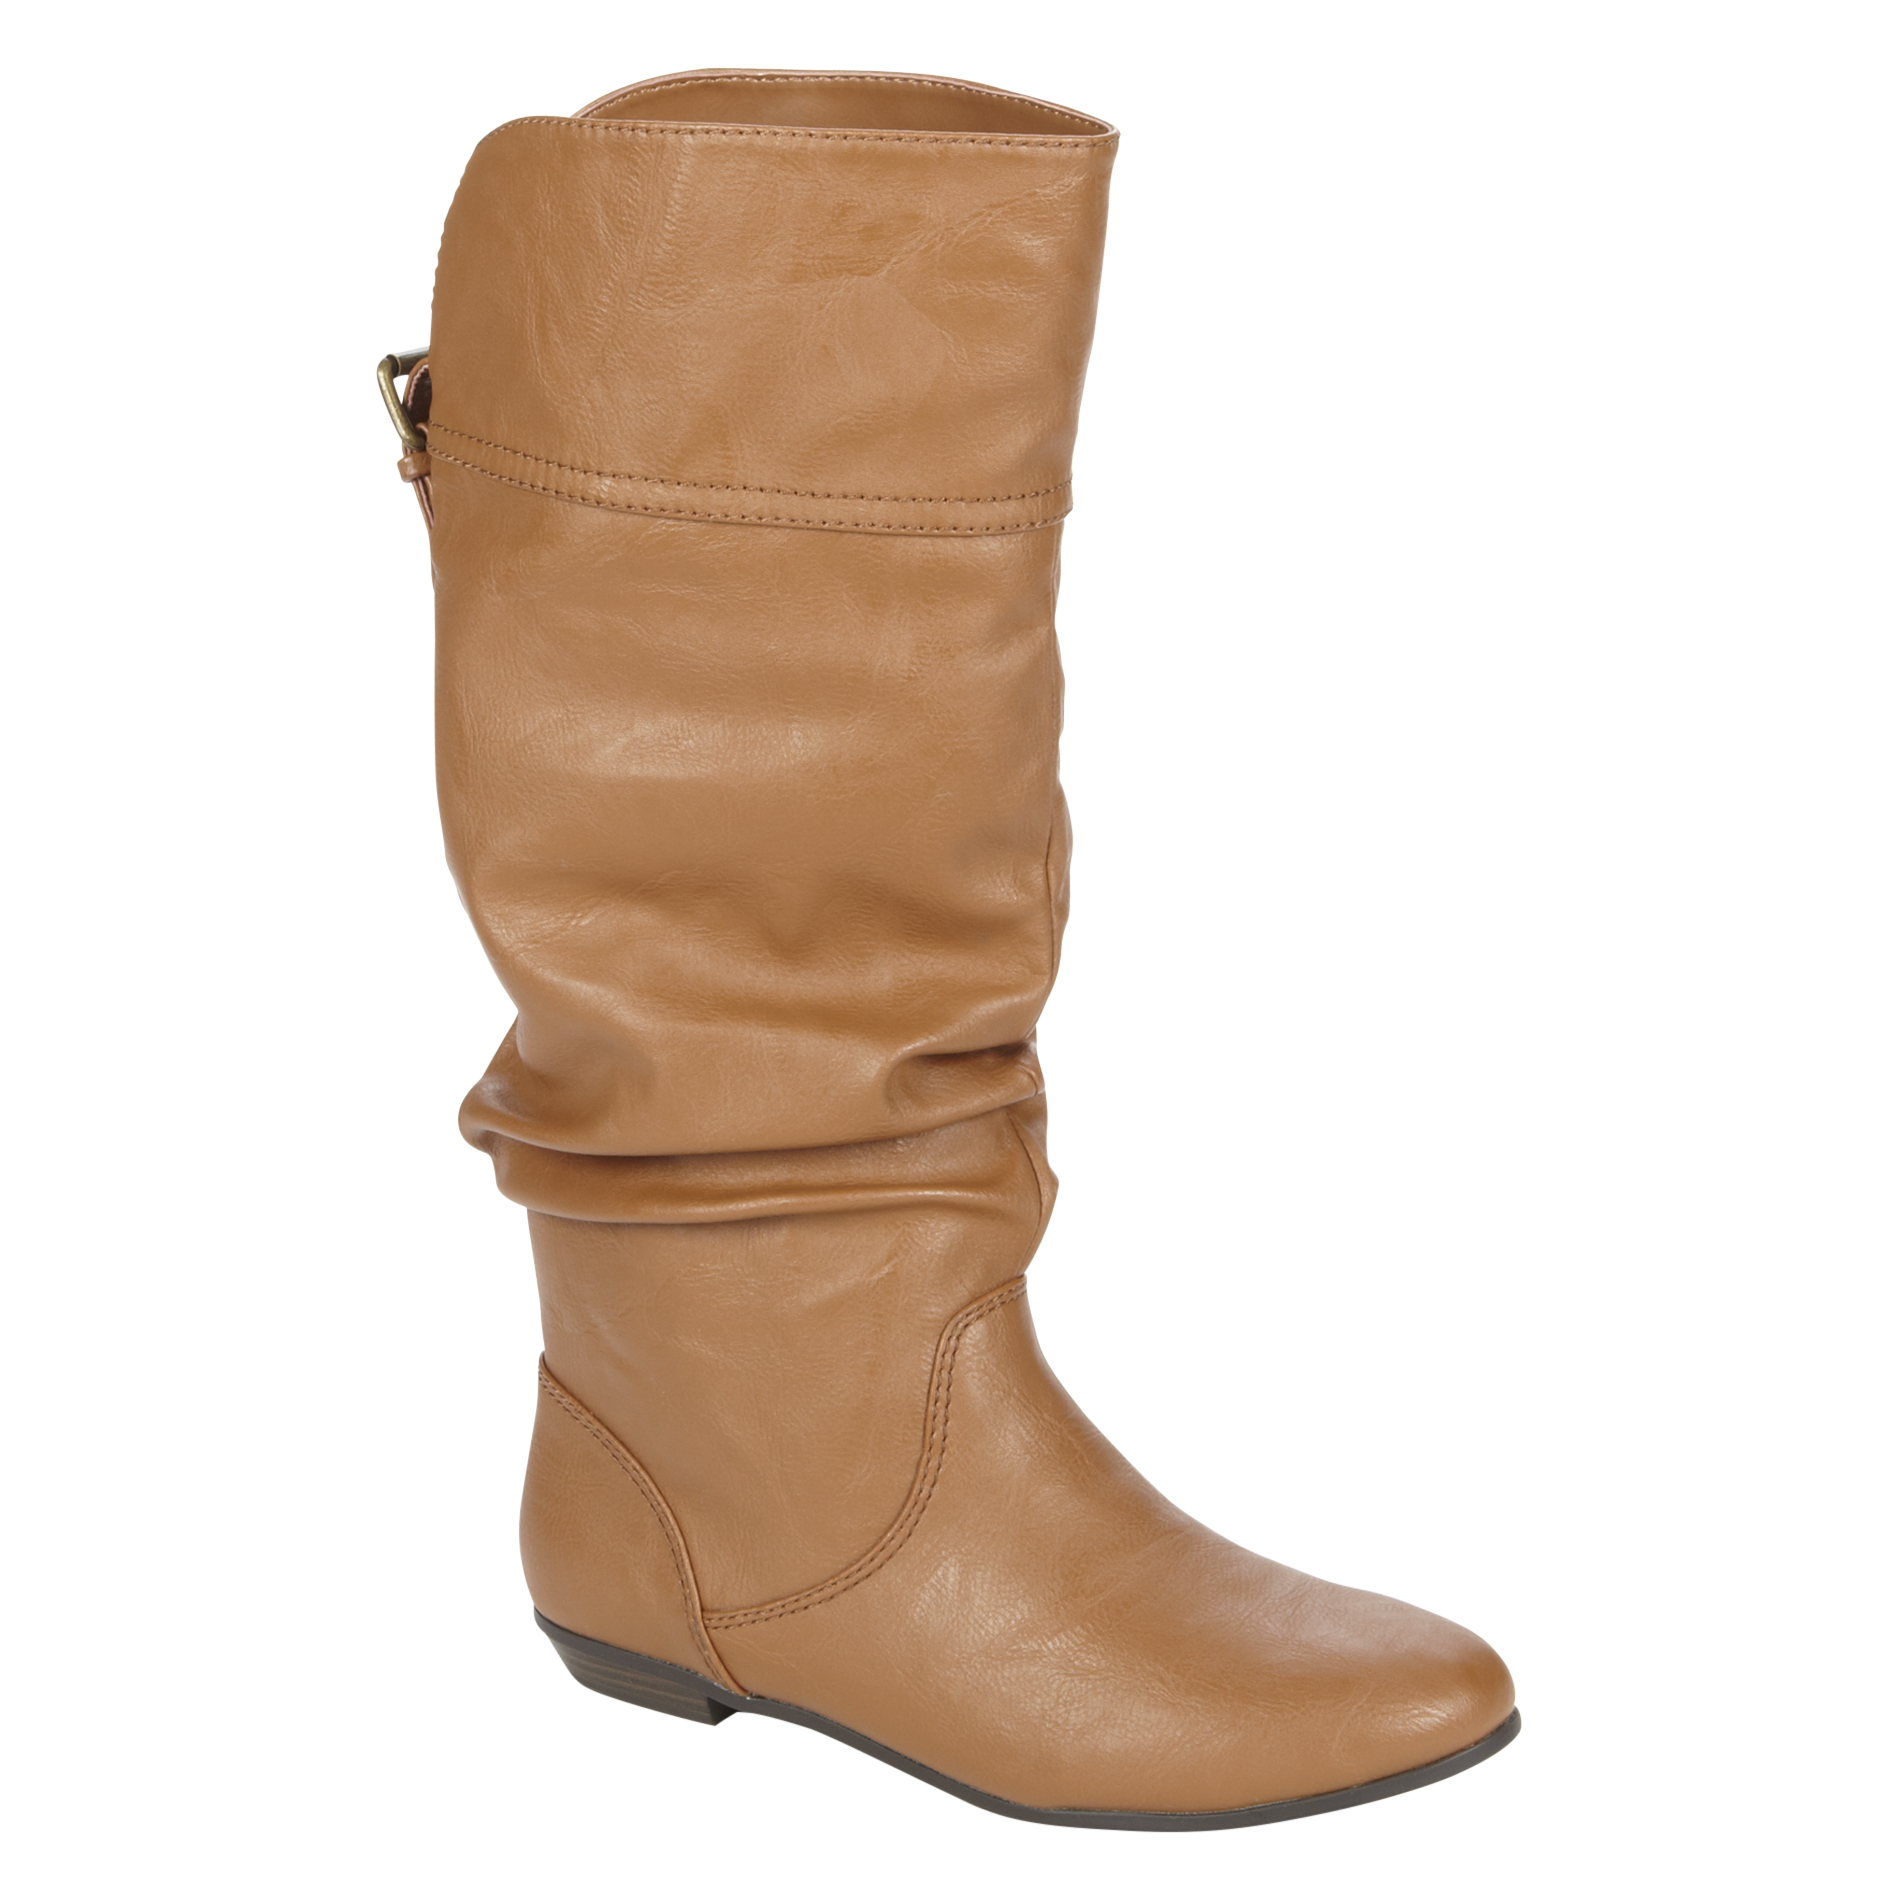 Trend Report Women's Anna Cognac Extended Calf Synthetic Slouch Fashion Boot